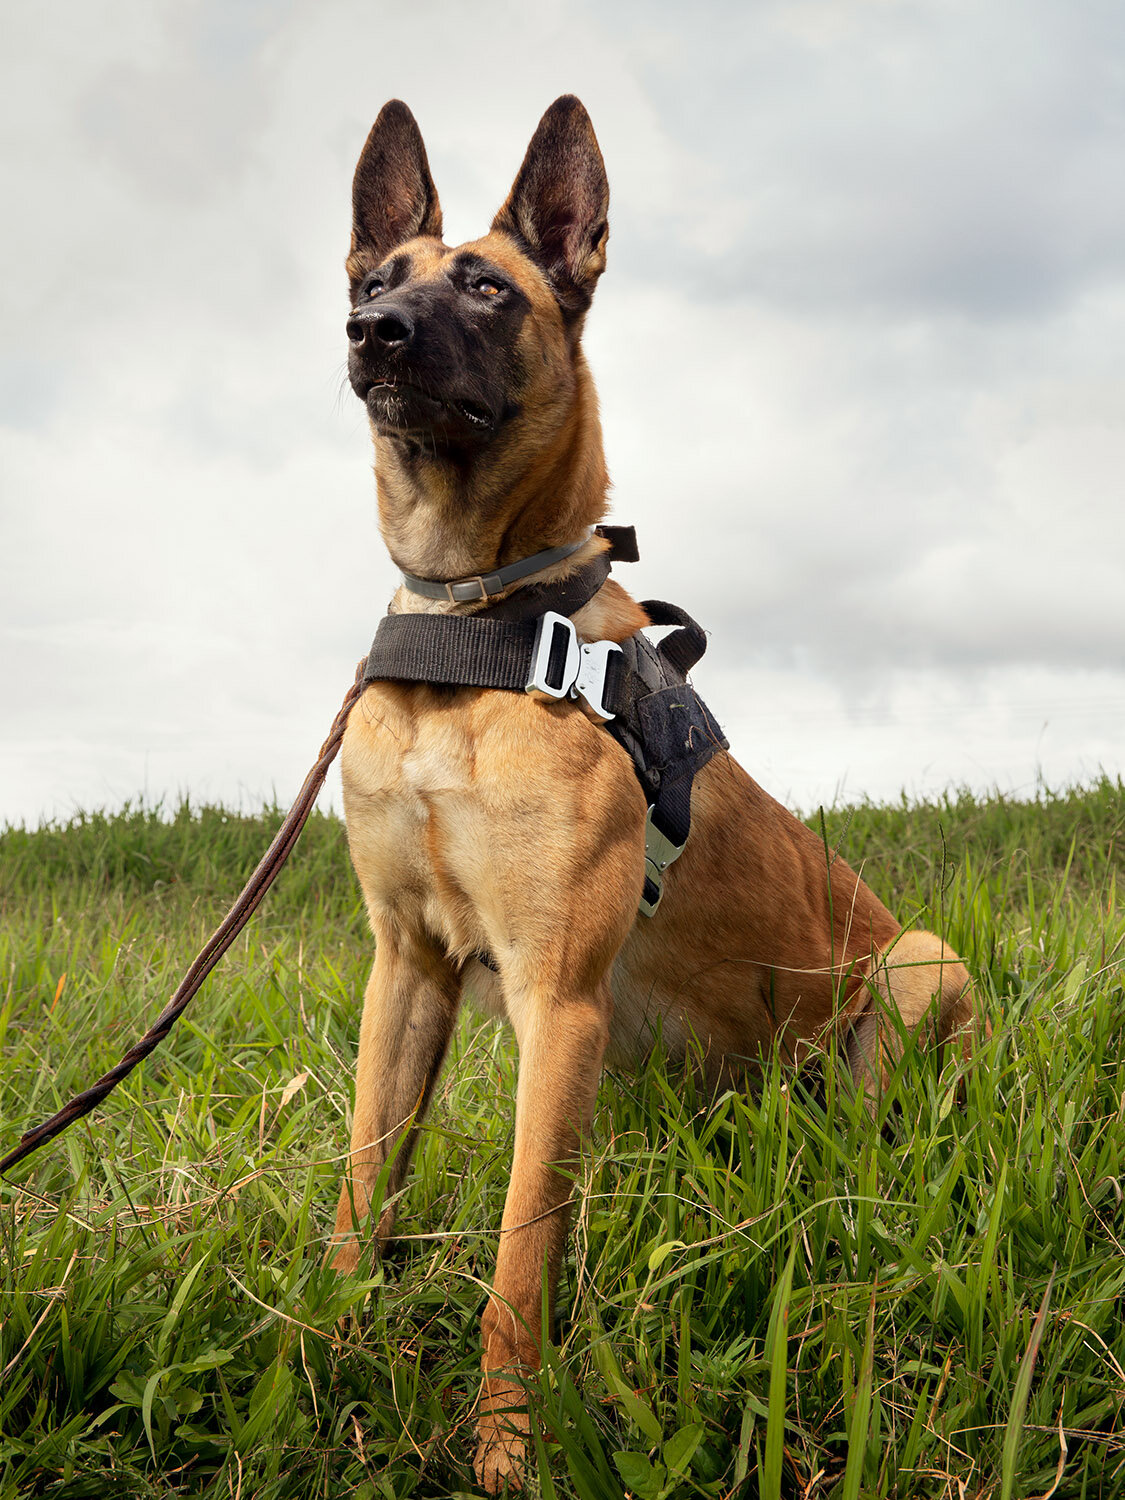  Wildlife Detection Dog Danna, Malawi, 2020.  Danna, a two-year-old Belgian Malinois, was the last of 5 dogs to join the Wildlife Detection Dog Unit in Malawi.  